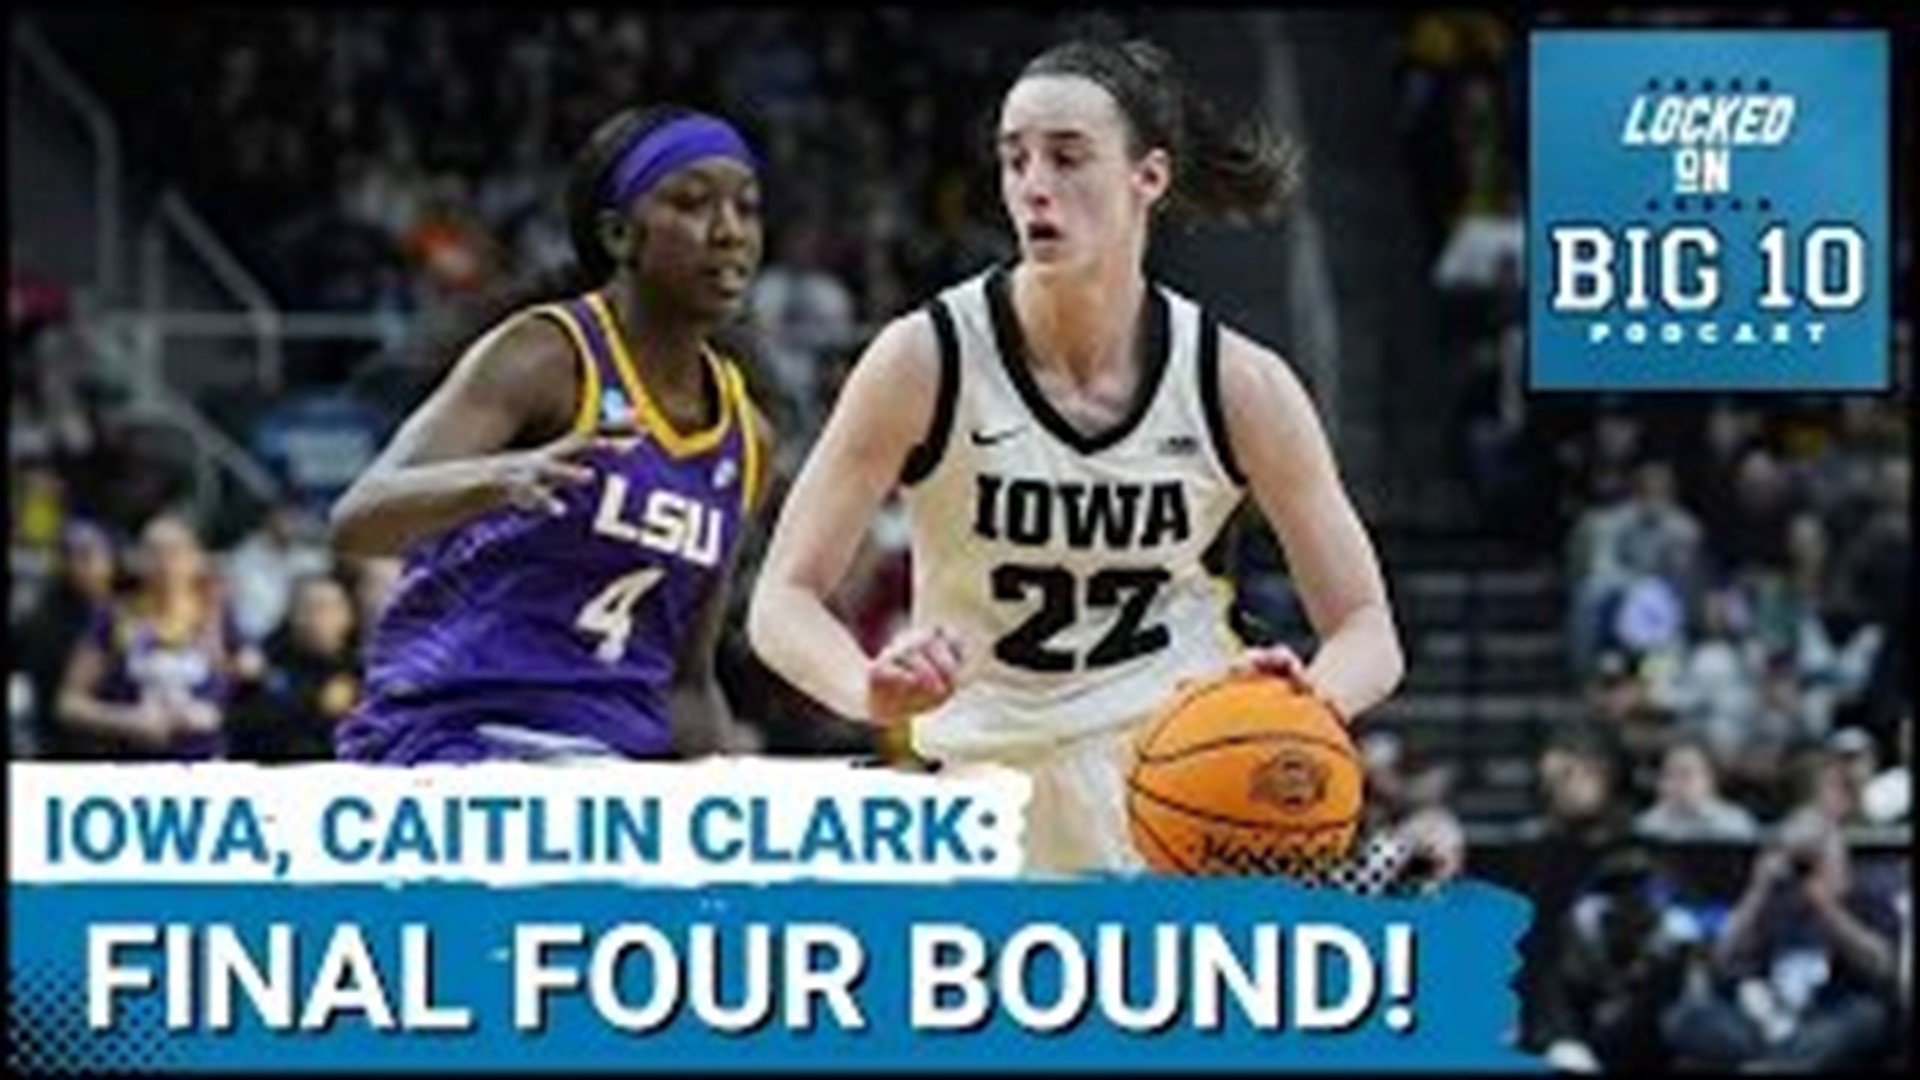 Caitlin Clark nailed 9 deep three pointers and scored 41 points as the Iowa Hawkeyes defeated Angel Reese and LSU 94-87 to earn back to back trips to the final four.